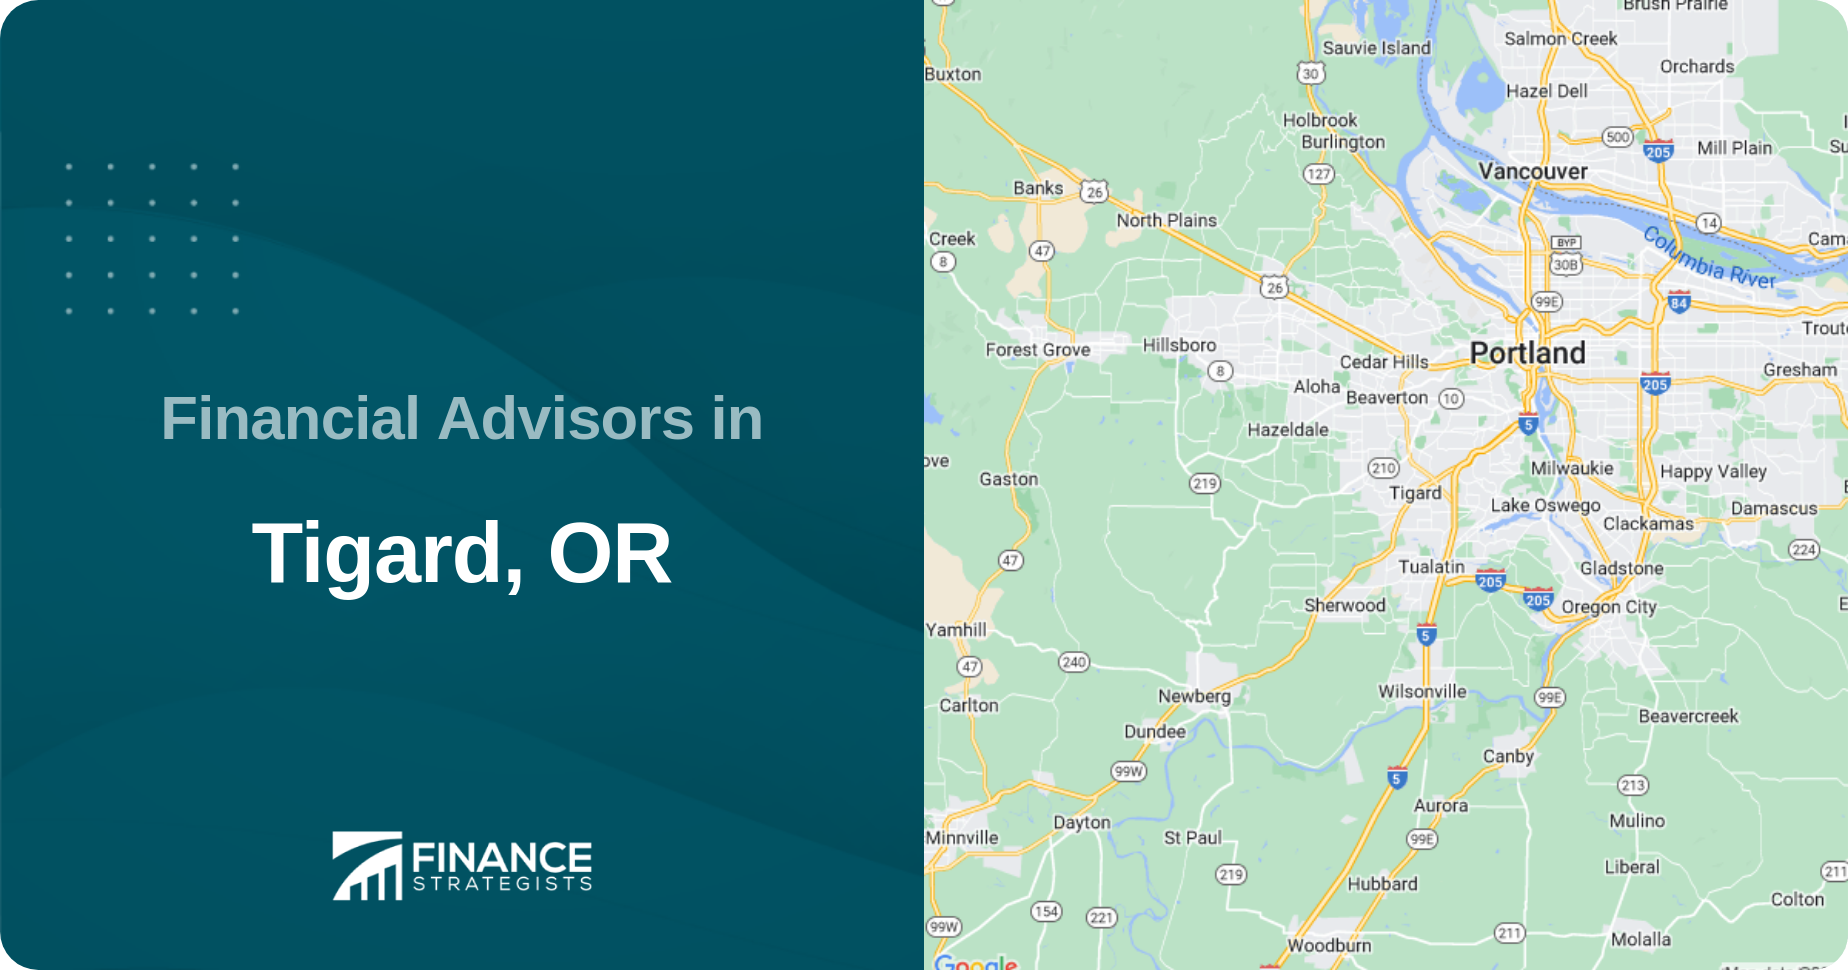 Financial Advisors in Tigard, OR